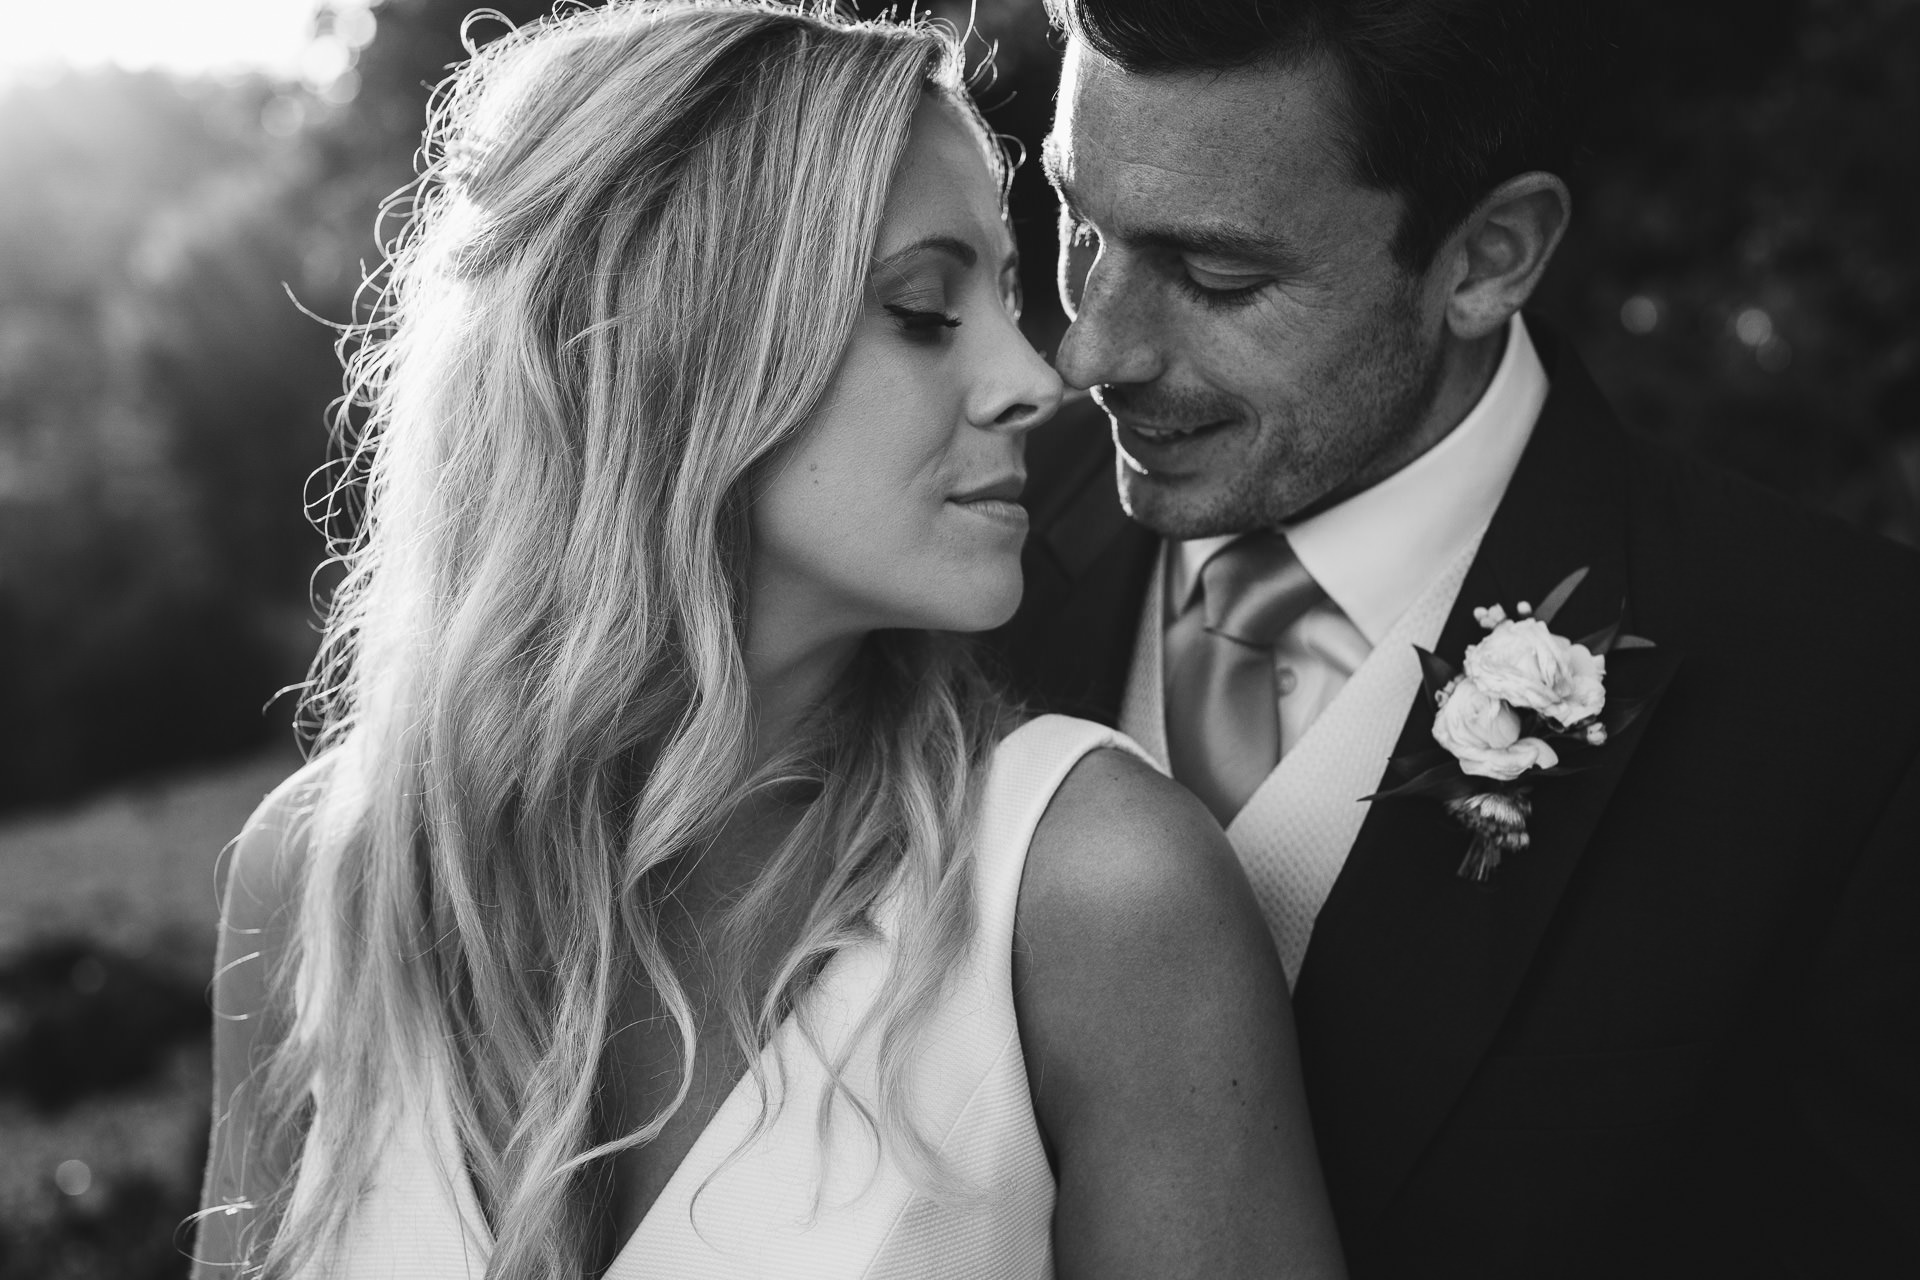 Close up black & white portrait of bride and groom